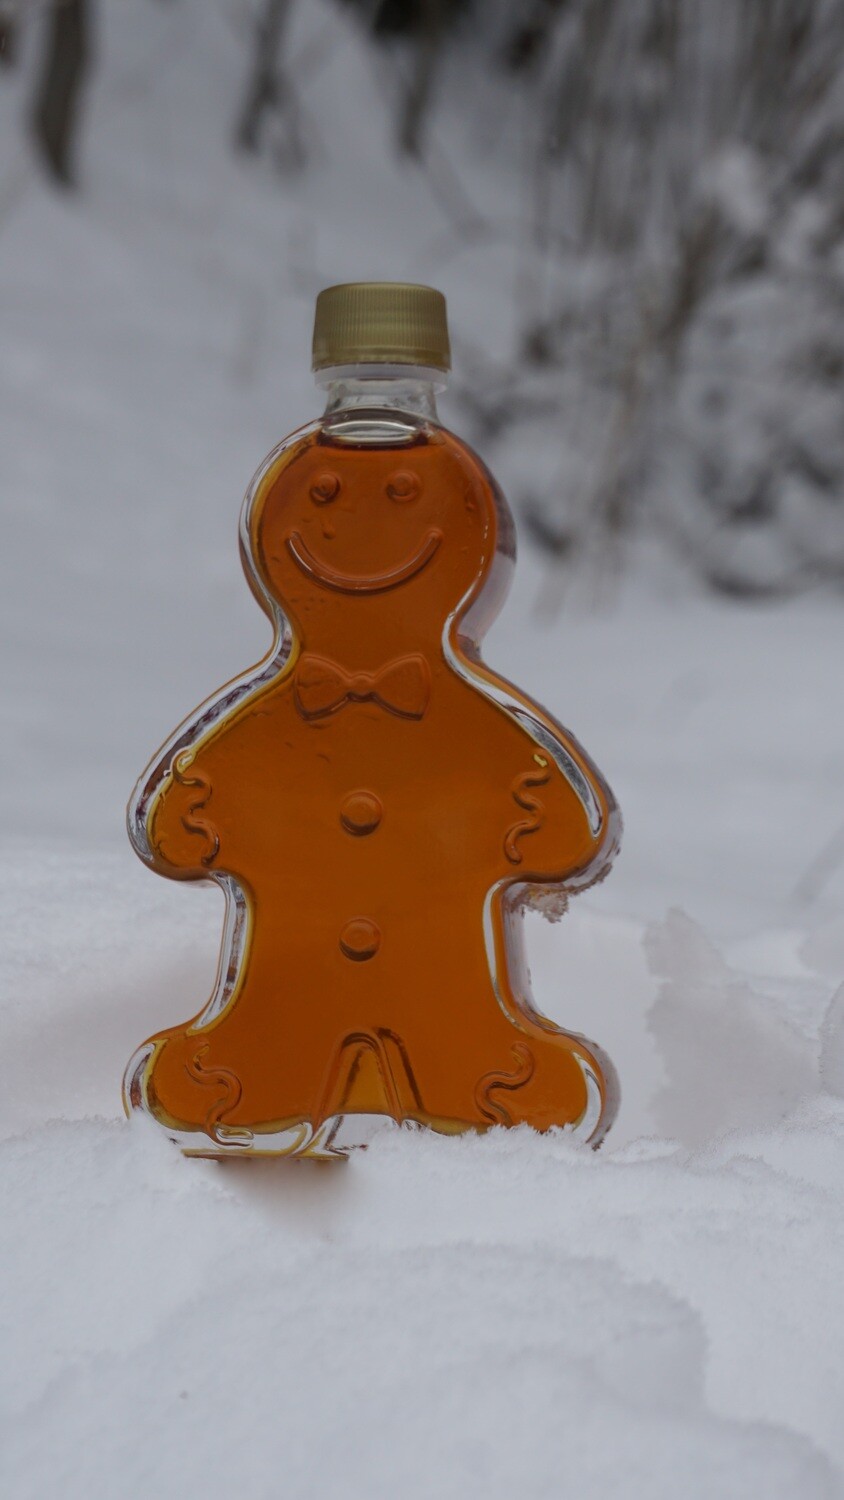 Pure Maple Syrup GINGERBREAD MAN Bottle, 8.45 oz. - Limited Edition